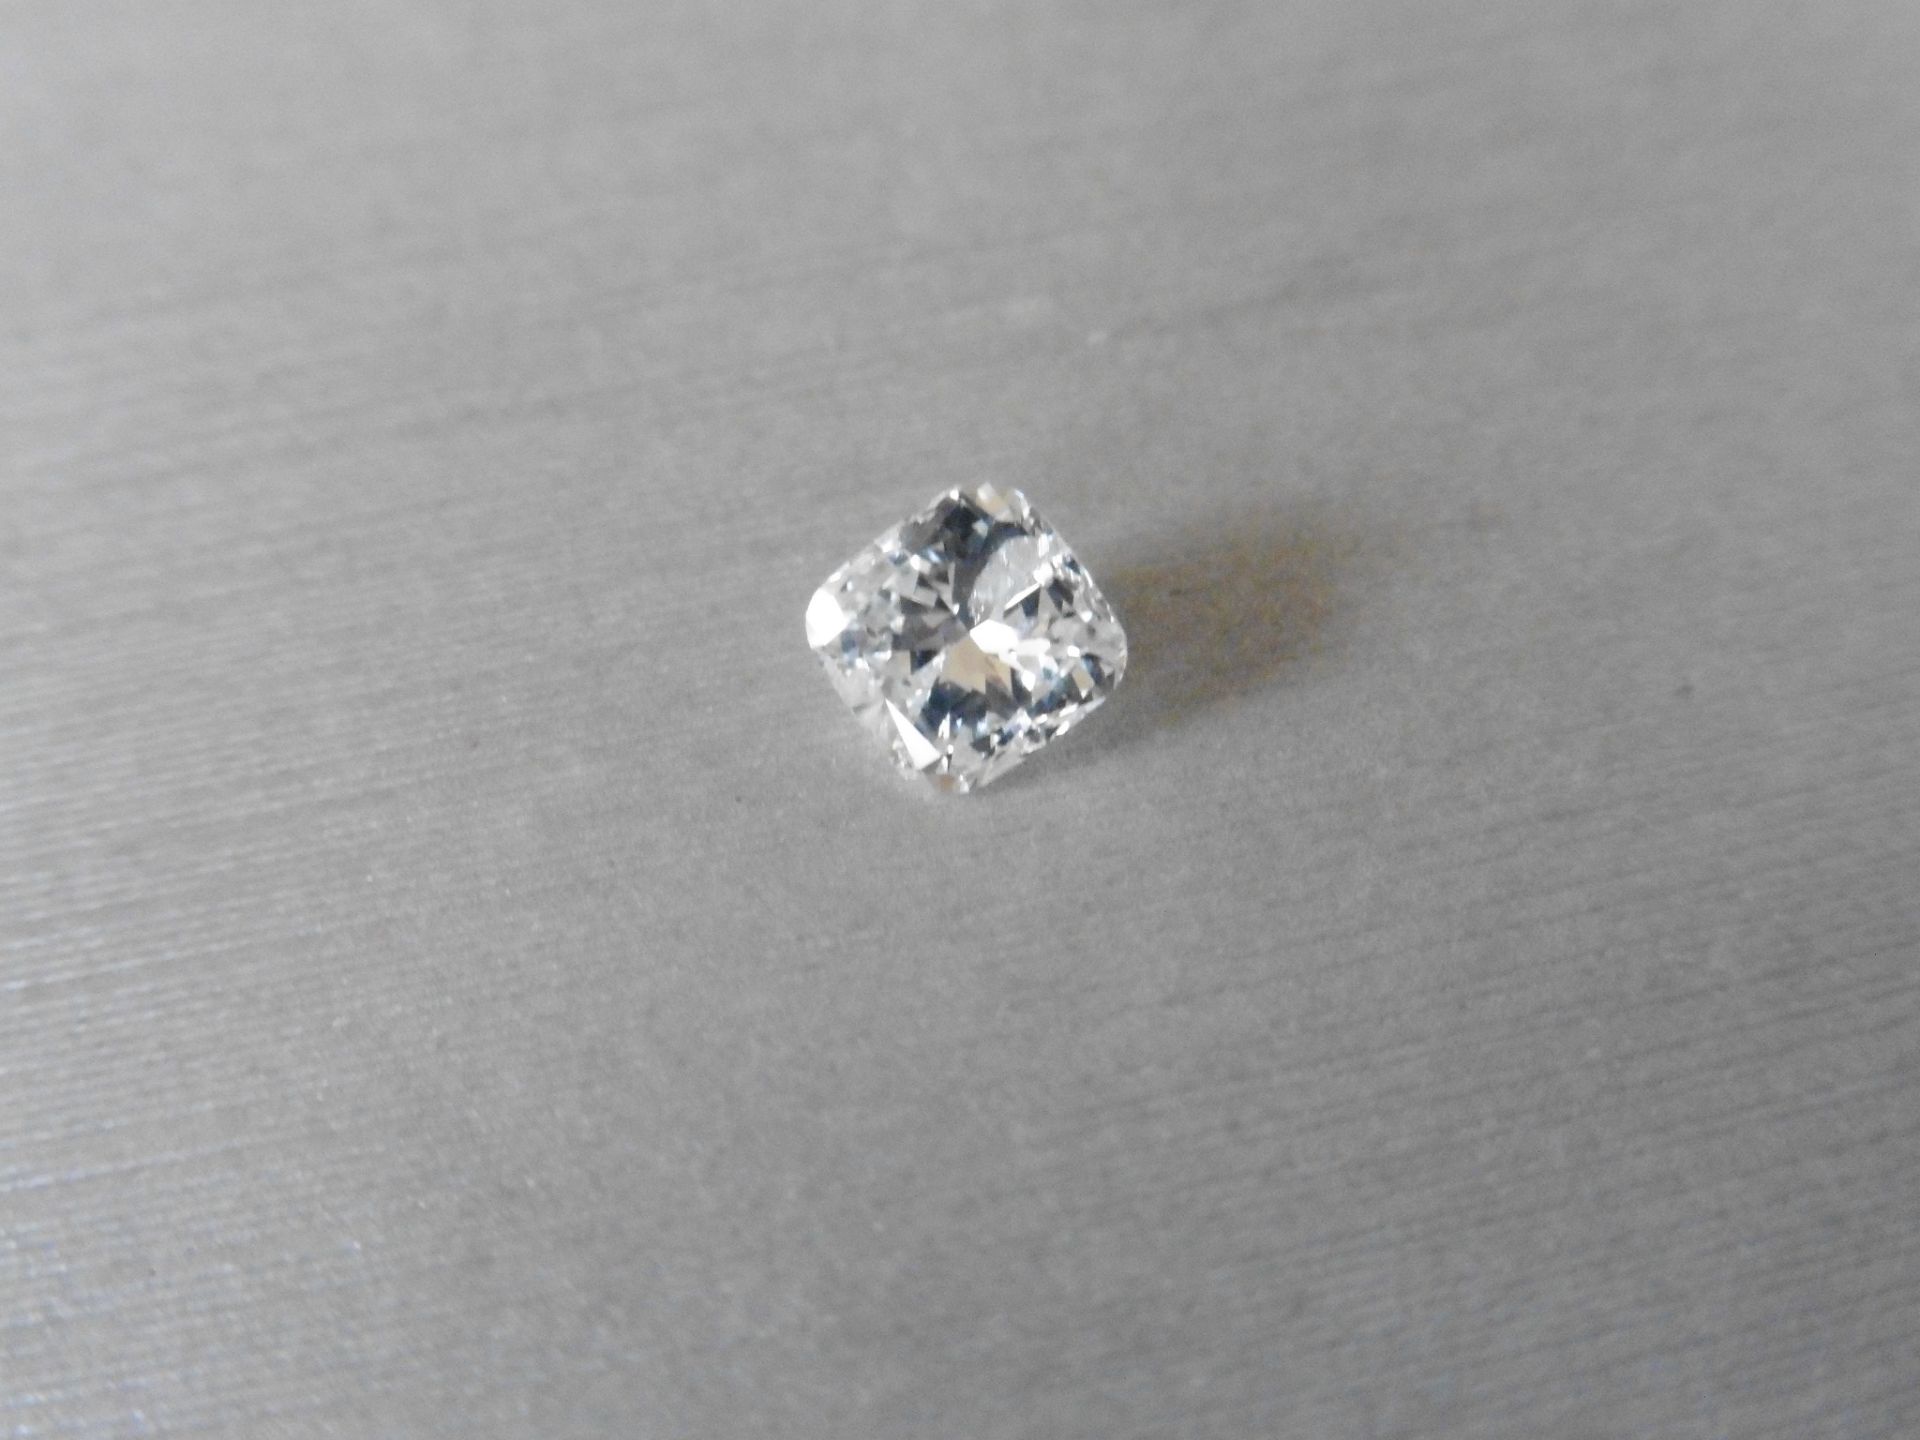 1.02ct square cut diamond. G colour, Si3 clarity. Measurements – 6.48 x 6.06 x 3.10mm. Ideal for